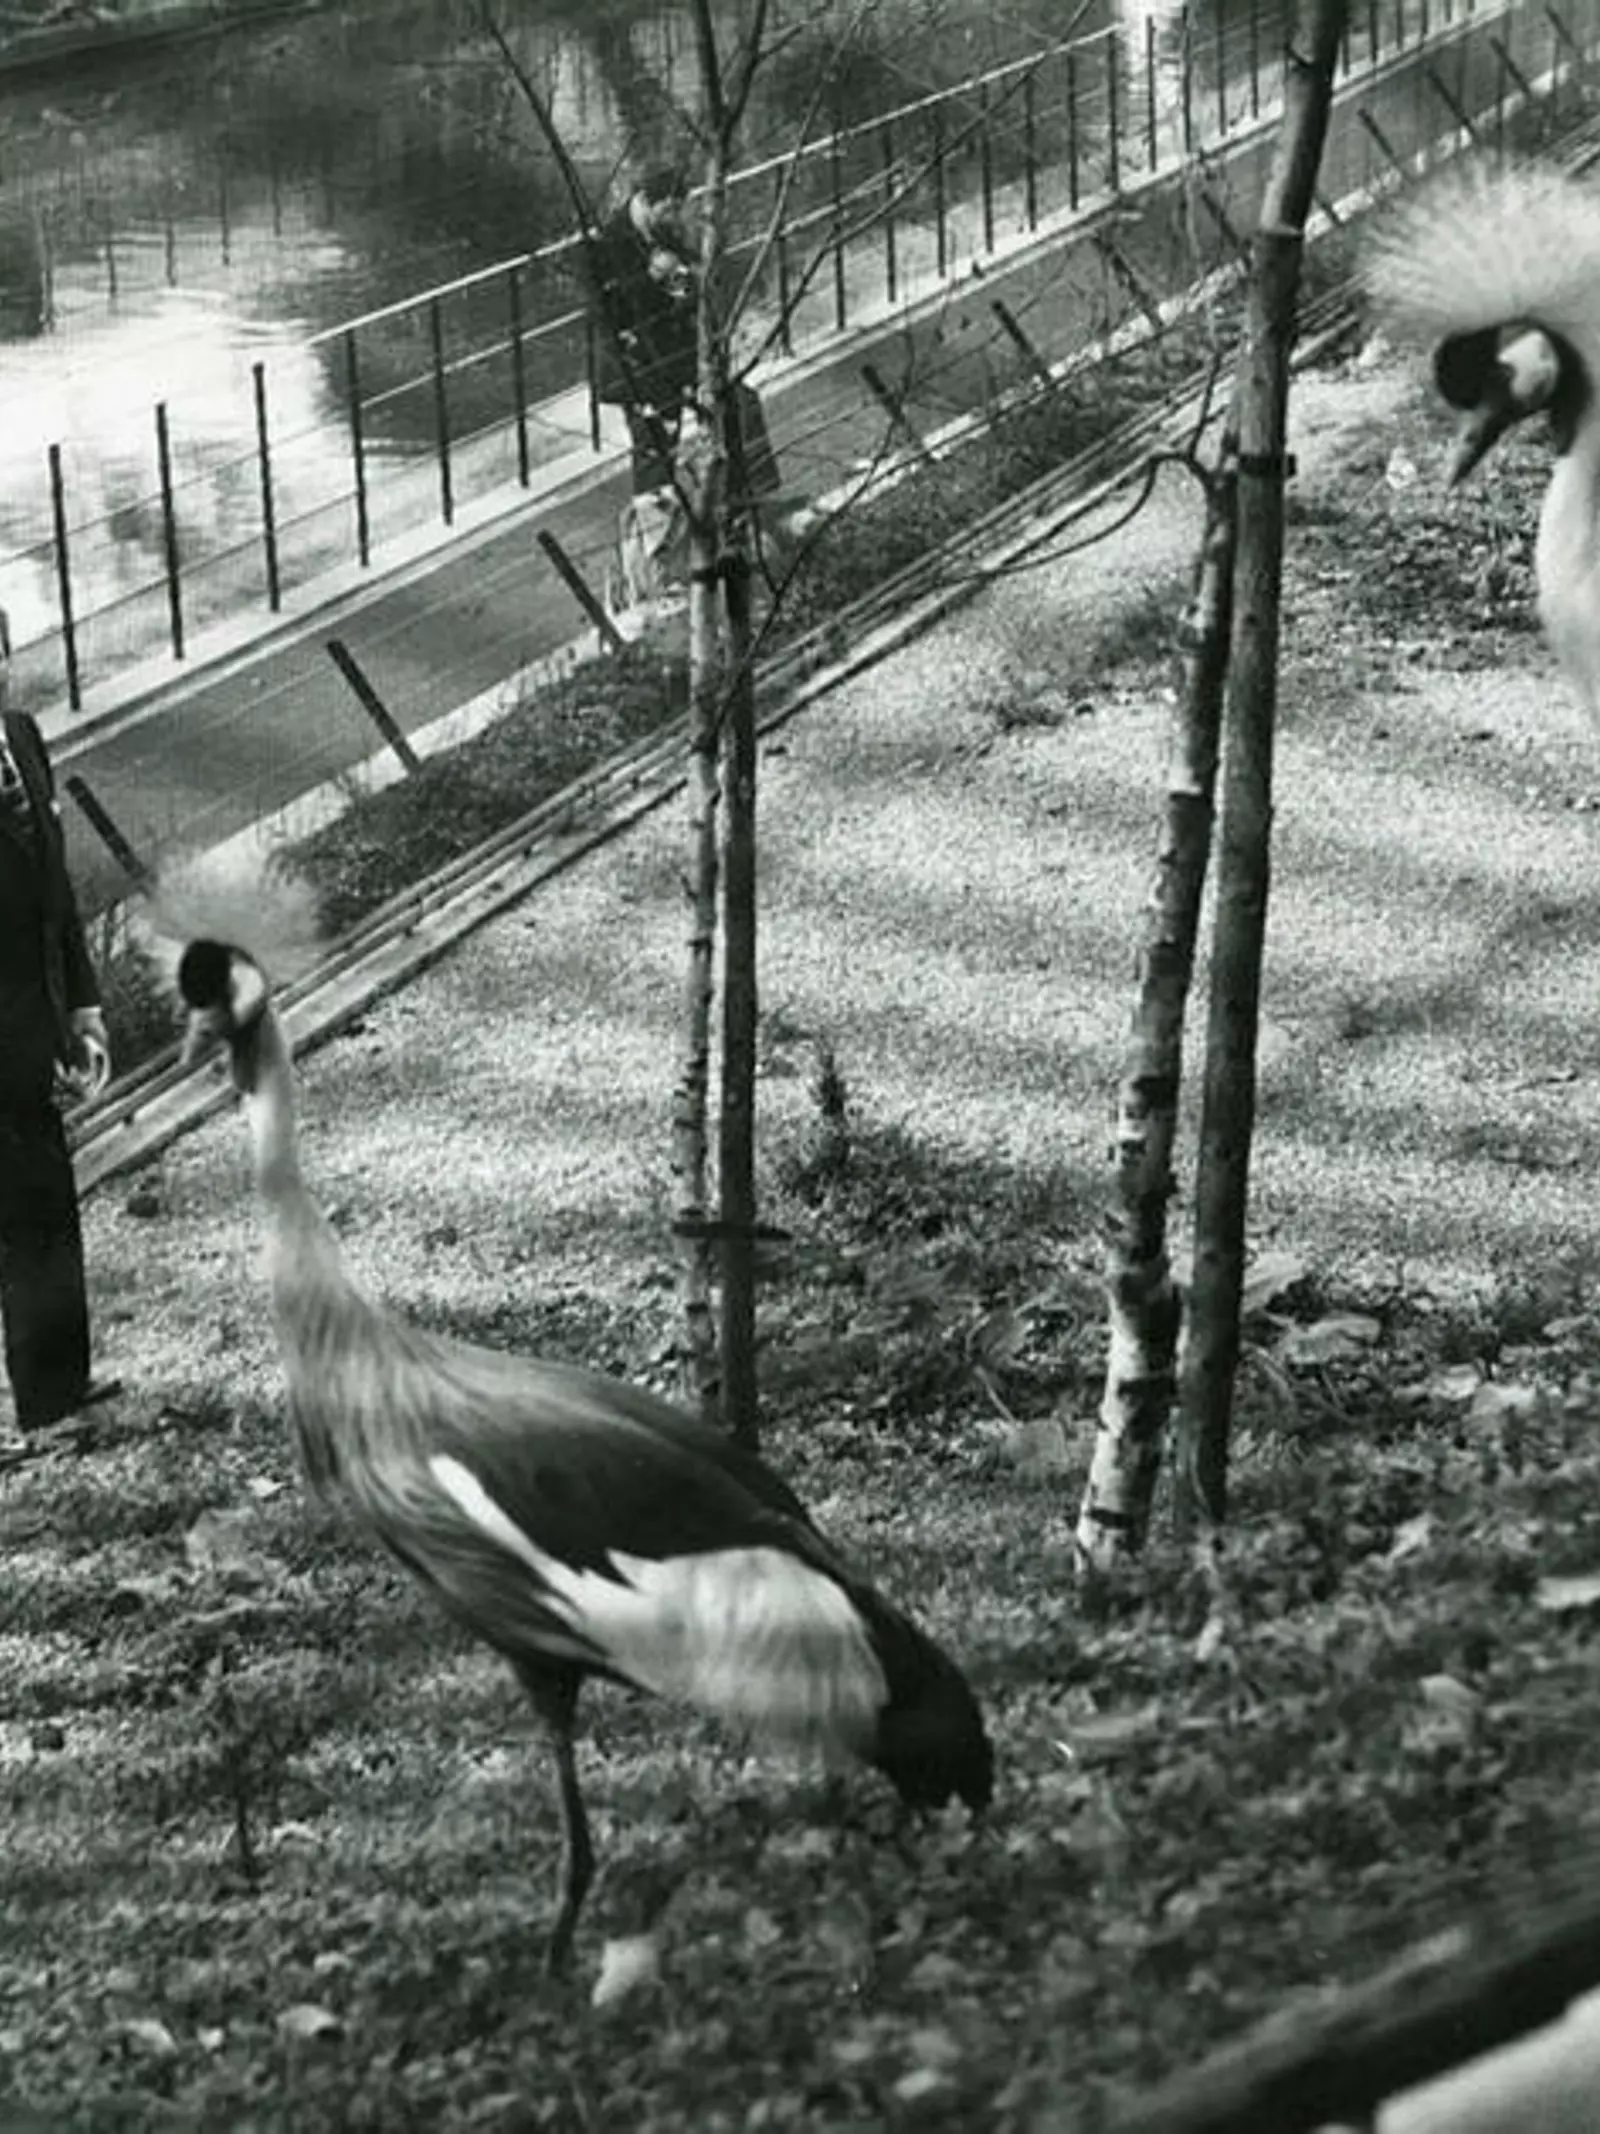 Lord Snowdon with Grey Crowned Cranes in the Snowdon Aviary on 27th May 1965. There is a photographer and four other people behind him on the bank of the Regent's Canal.